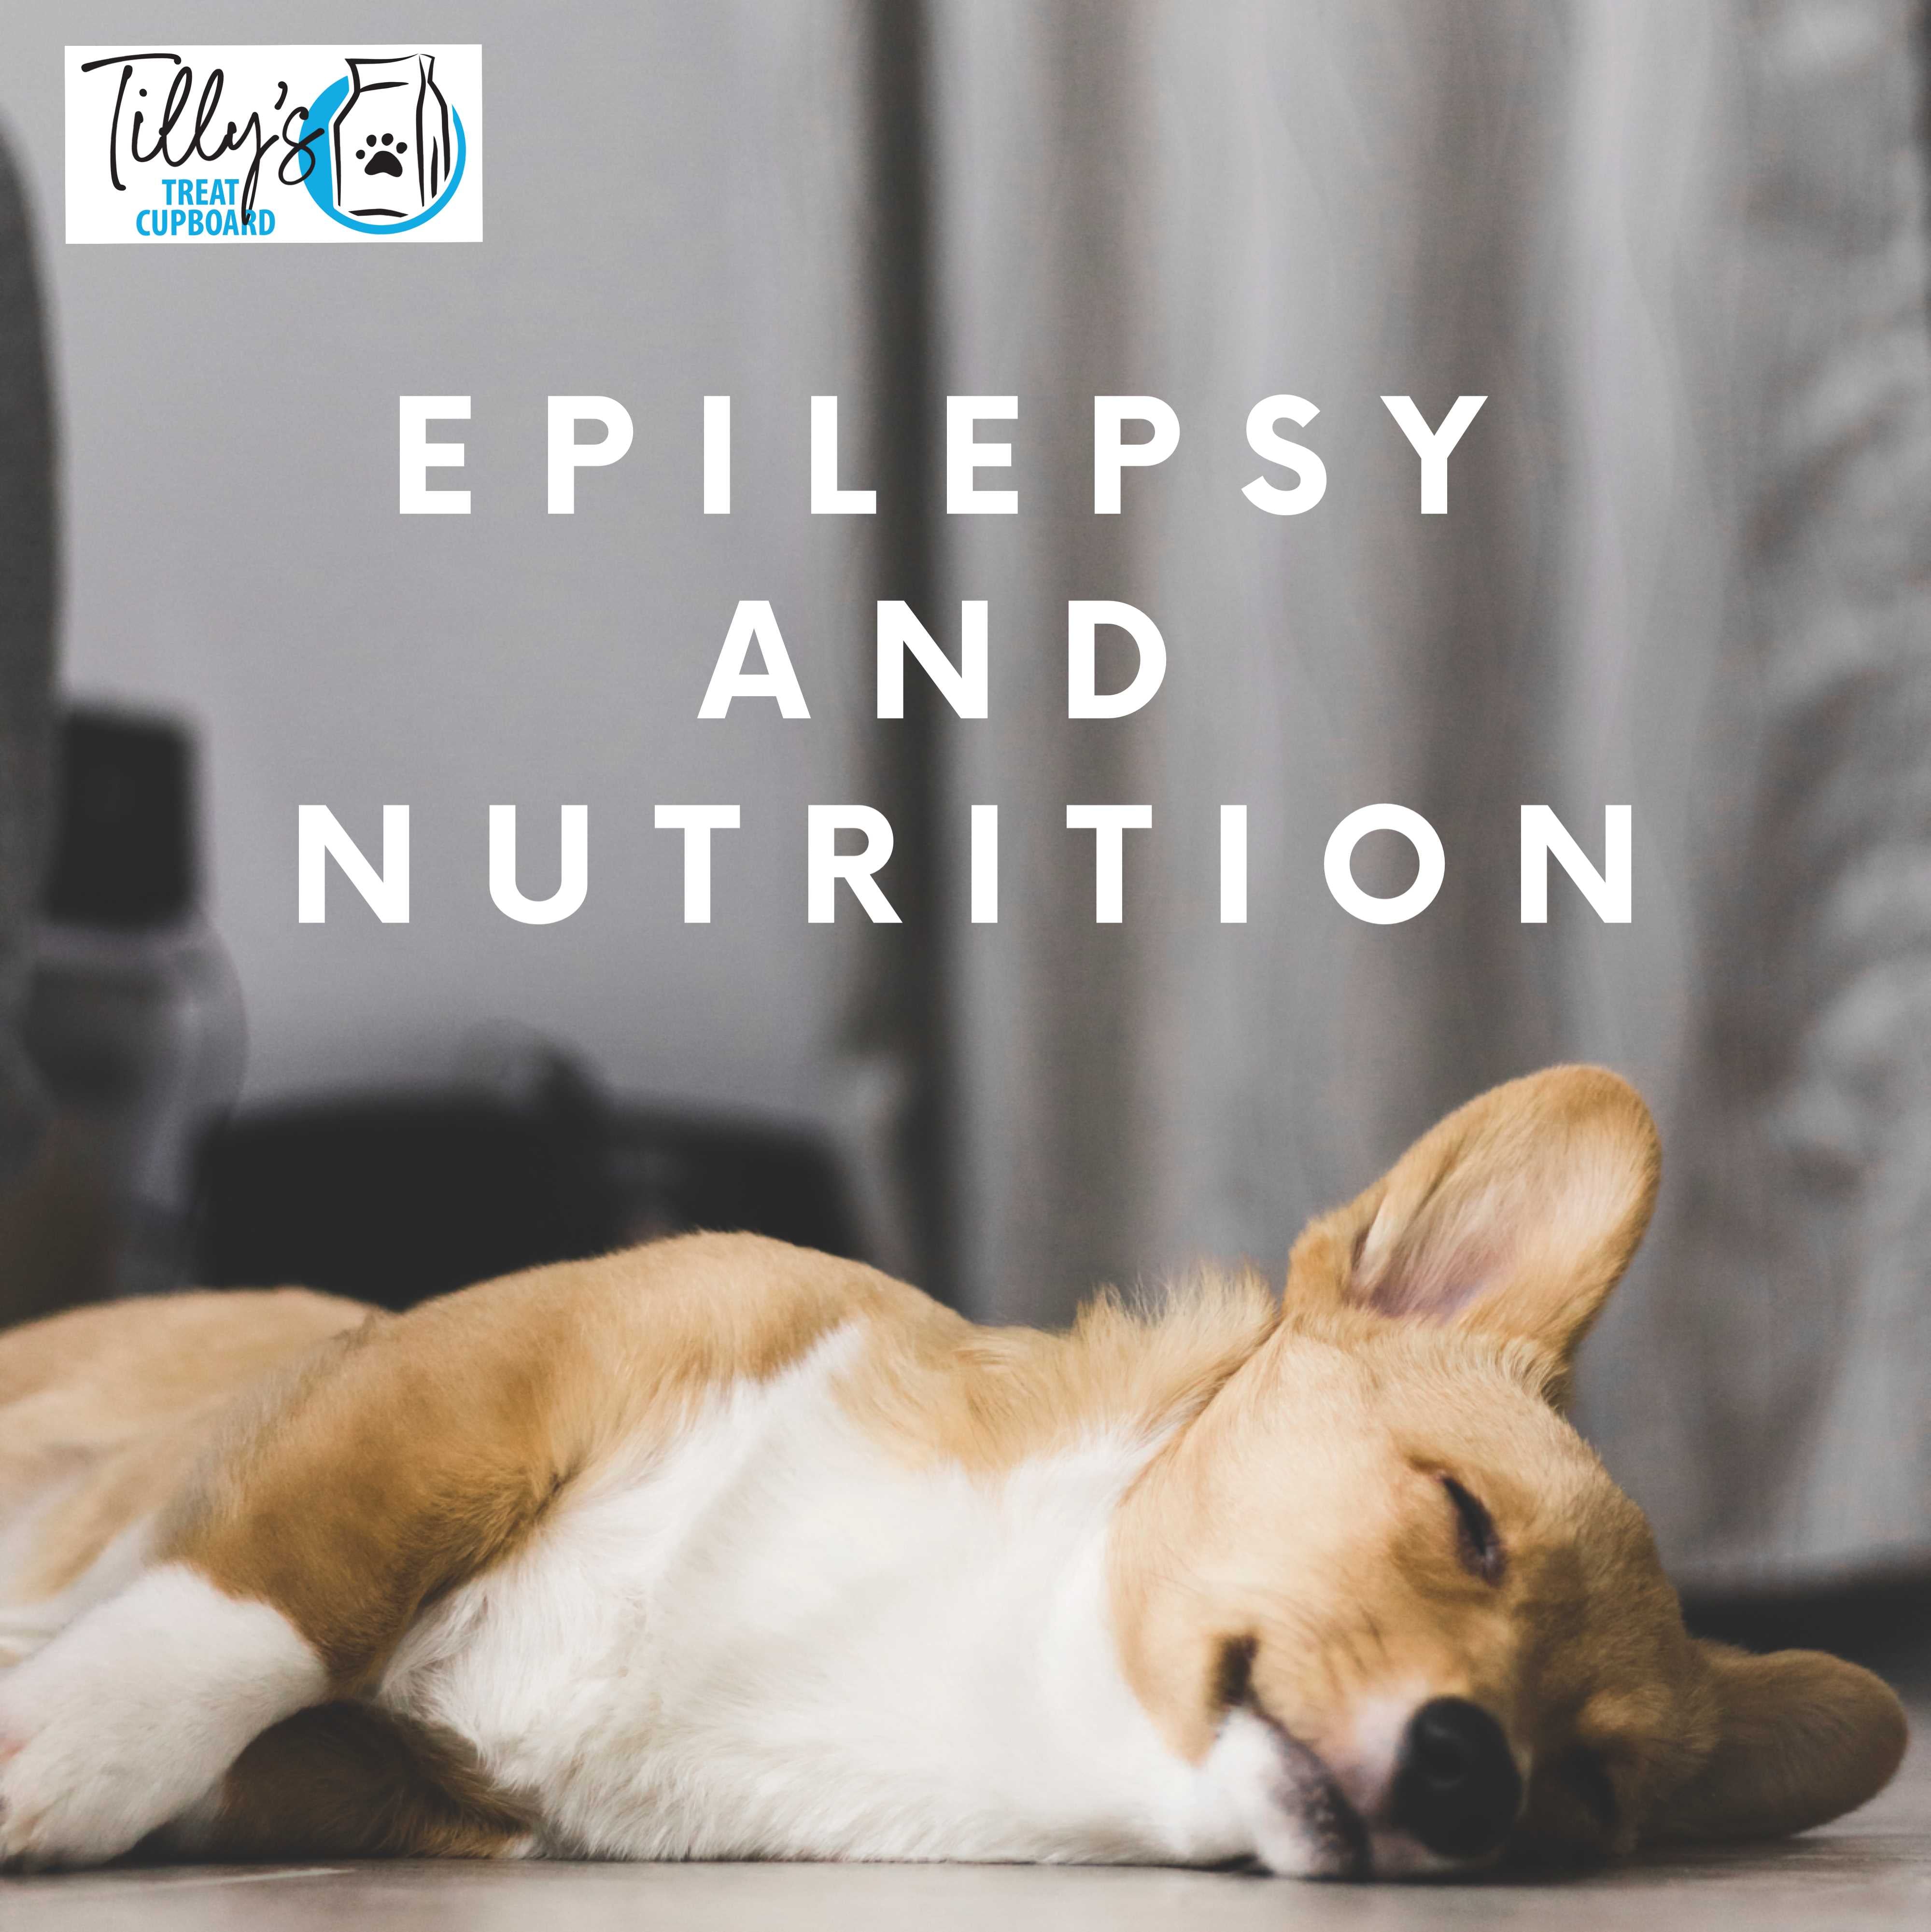 Idopathic Epilespy – Can it be controlled through diet?